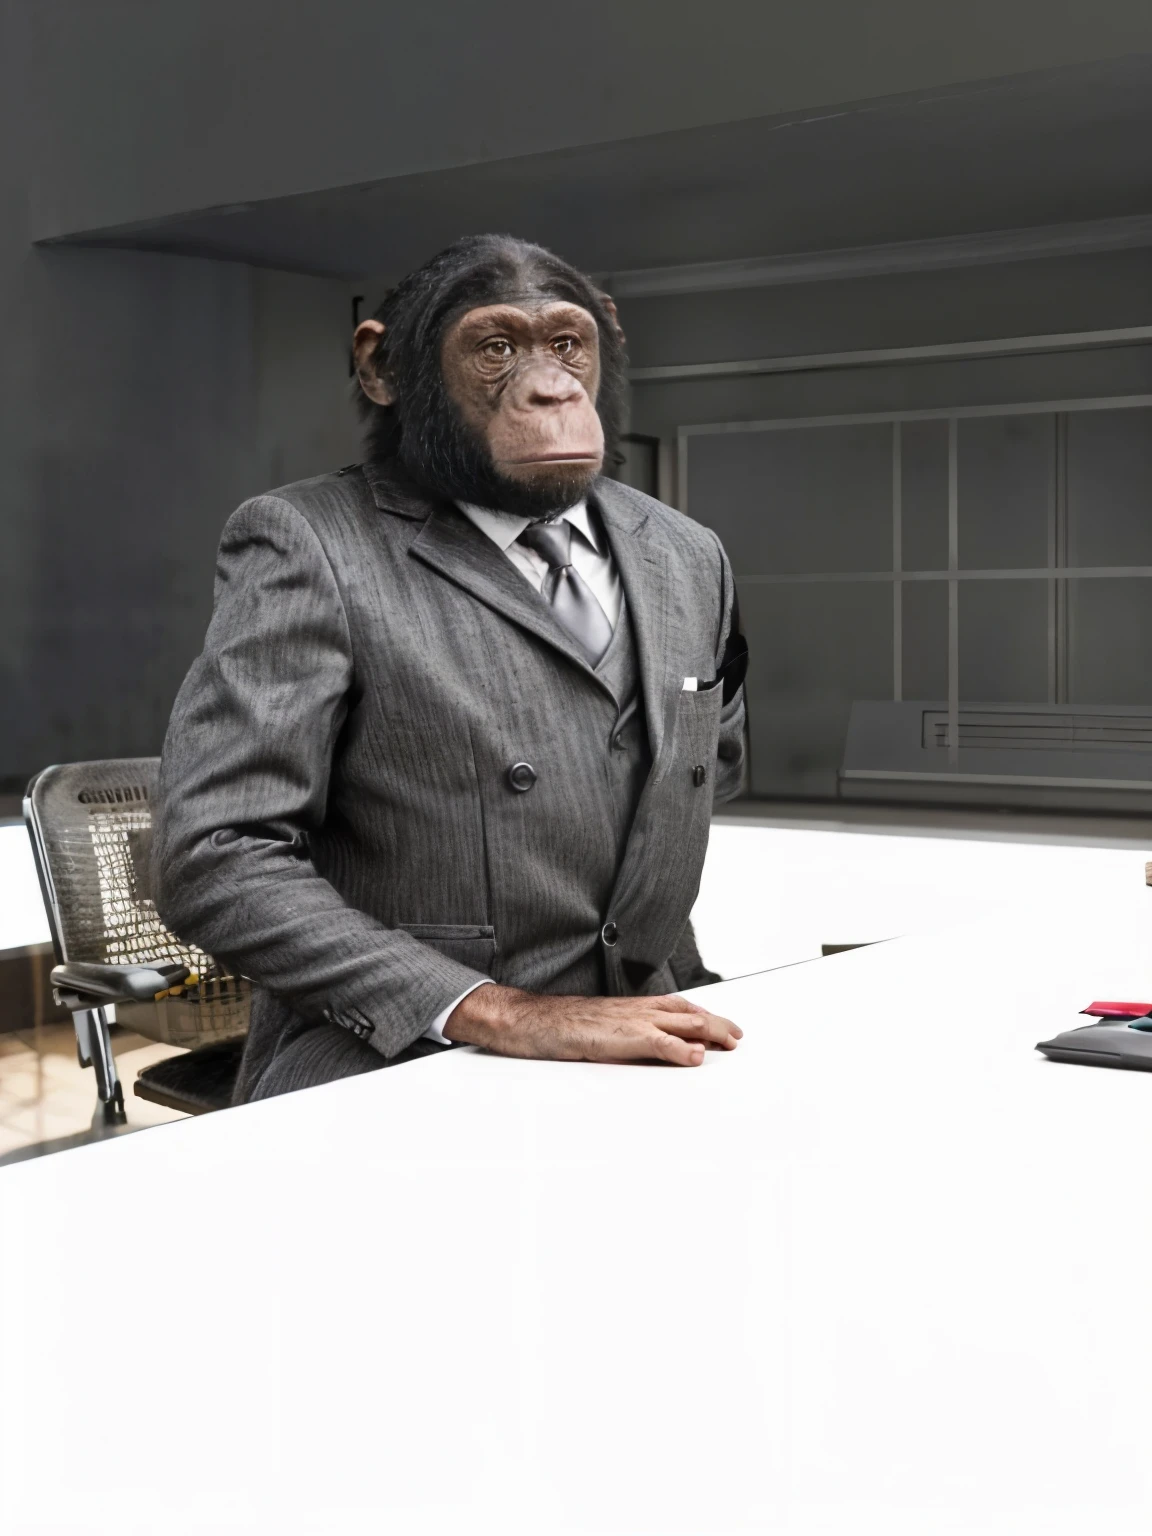 arafed image of a ape in a suit and tie sitting at a table, bored ape, chimpanzee wearing a suit and tie, subject= chimp, bored ape nft, monkey dressed as a scientist, realistic cgi, wearing a strict business suit, brown and black fur, humanoid monkey fantasy race, depicted as a 3 d render, 3d cgi, 3 d cgi